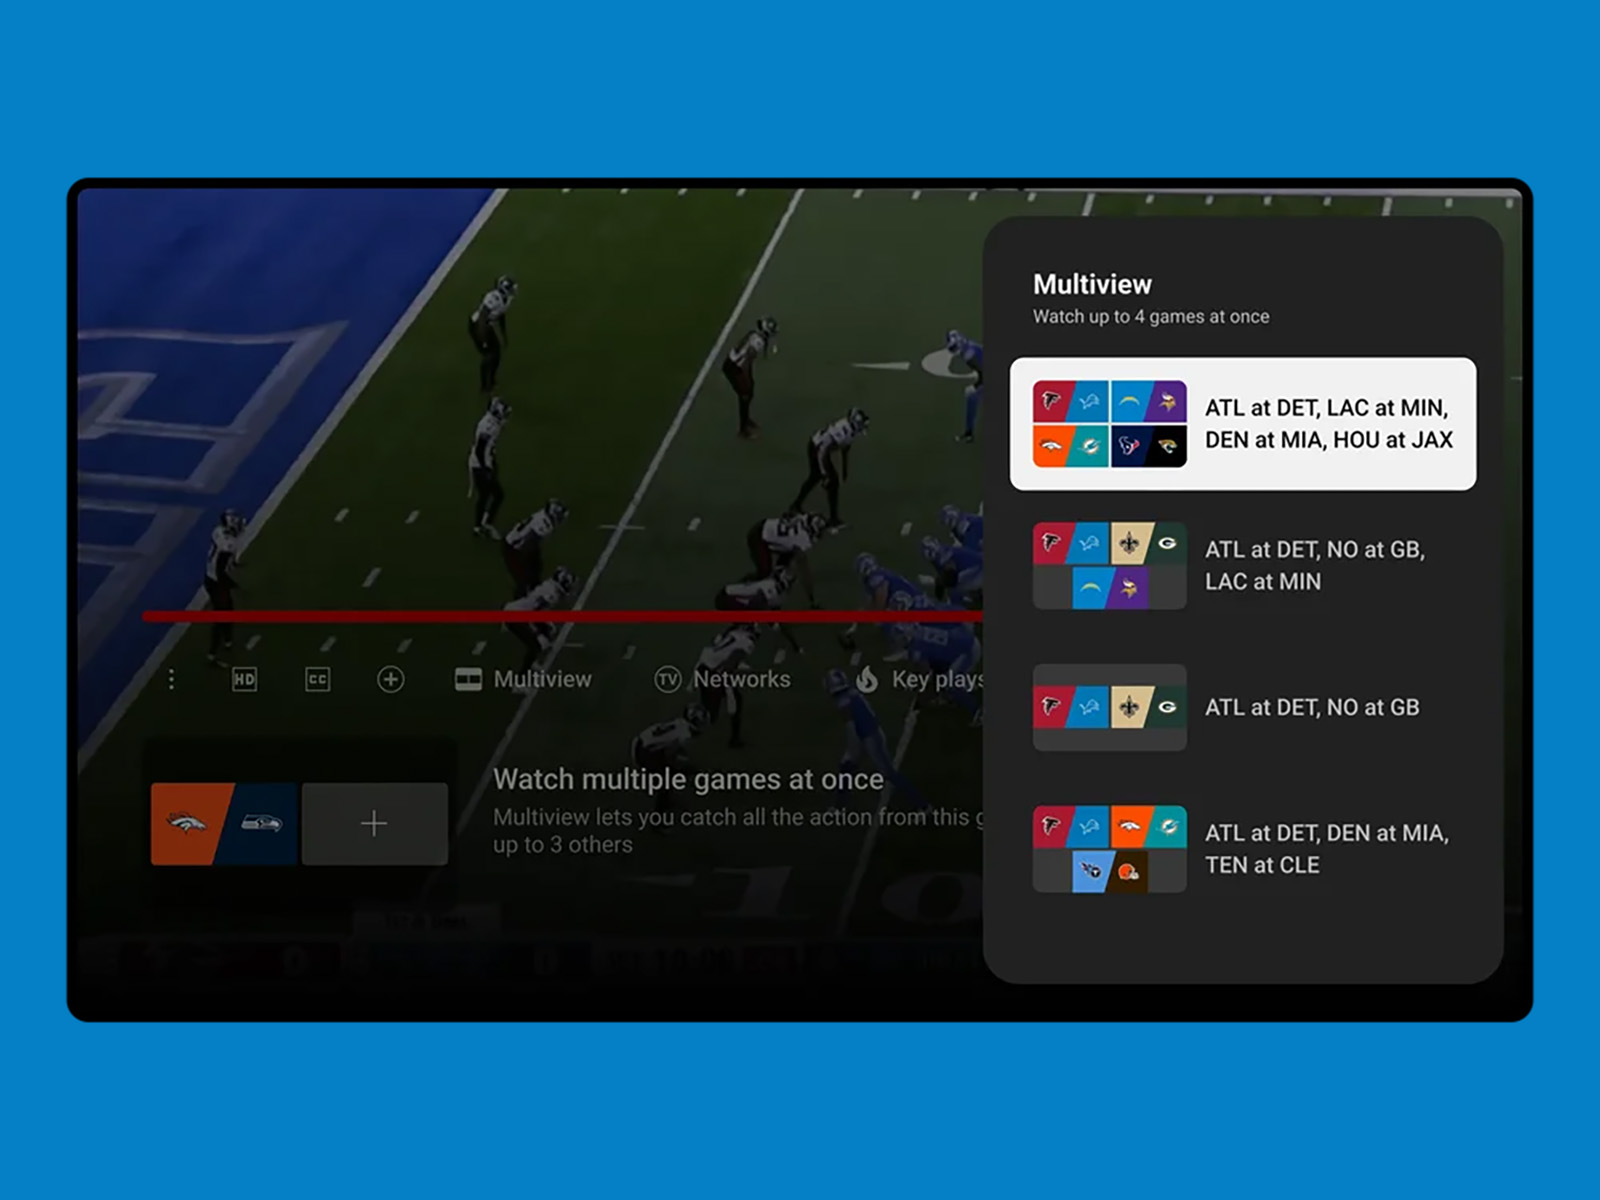 YouTubes NFL Sunday Ticket Gets 6 Sweet Features Before Kickoff